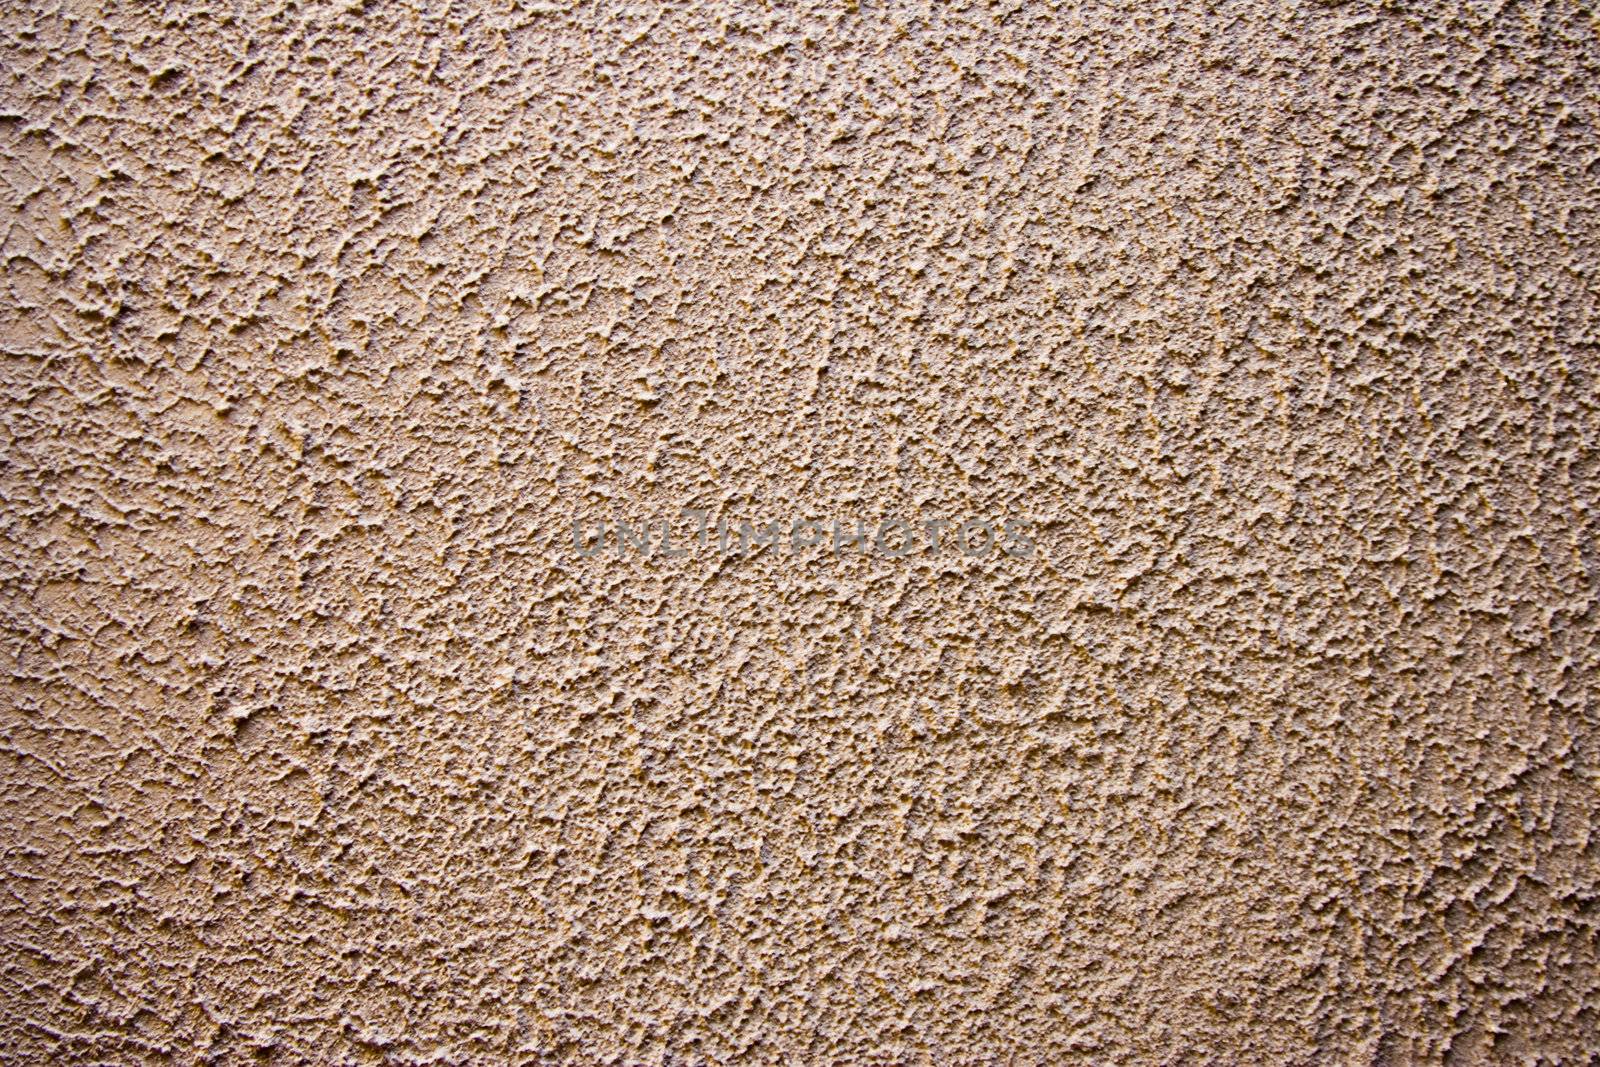 textured wall by snokid